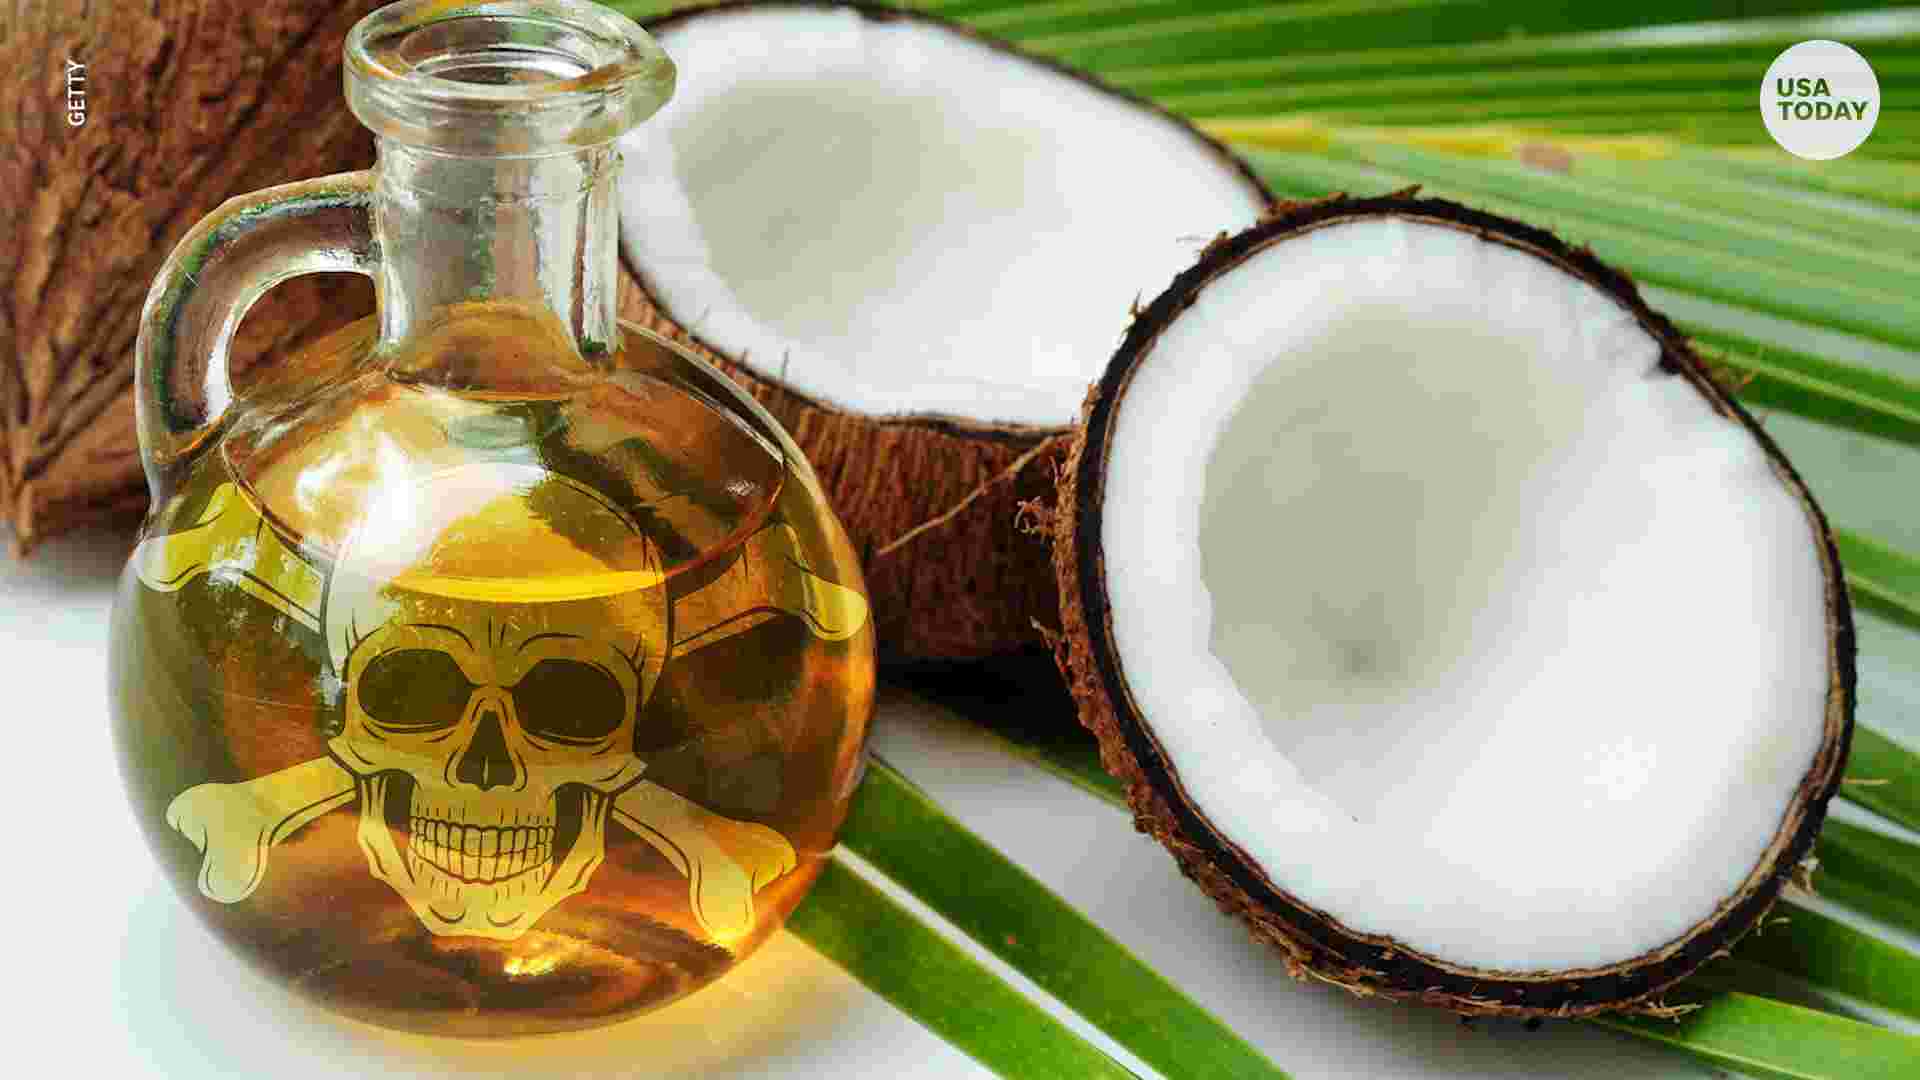 Is Coconut Oil A Healthy Food? - Great Lakes Ledger